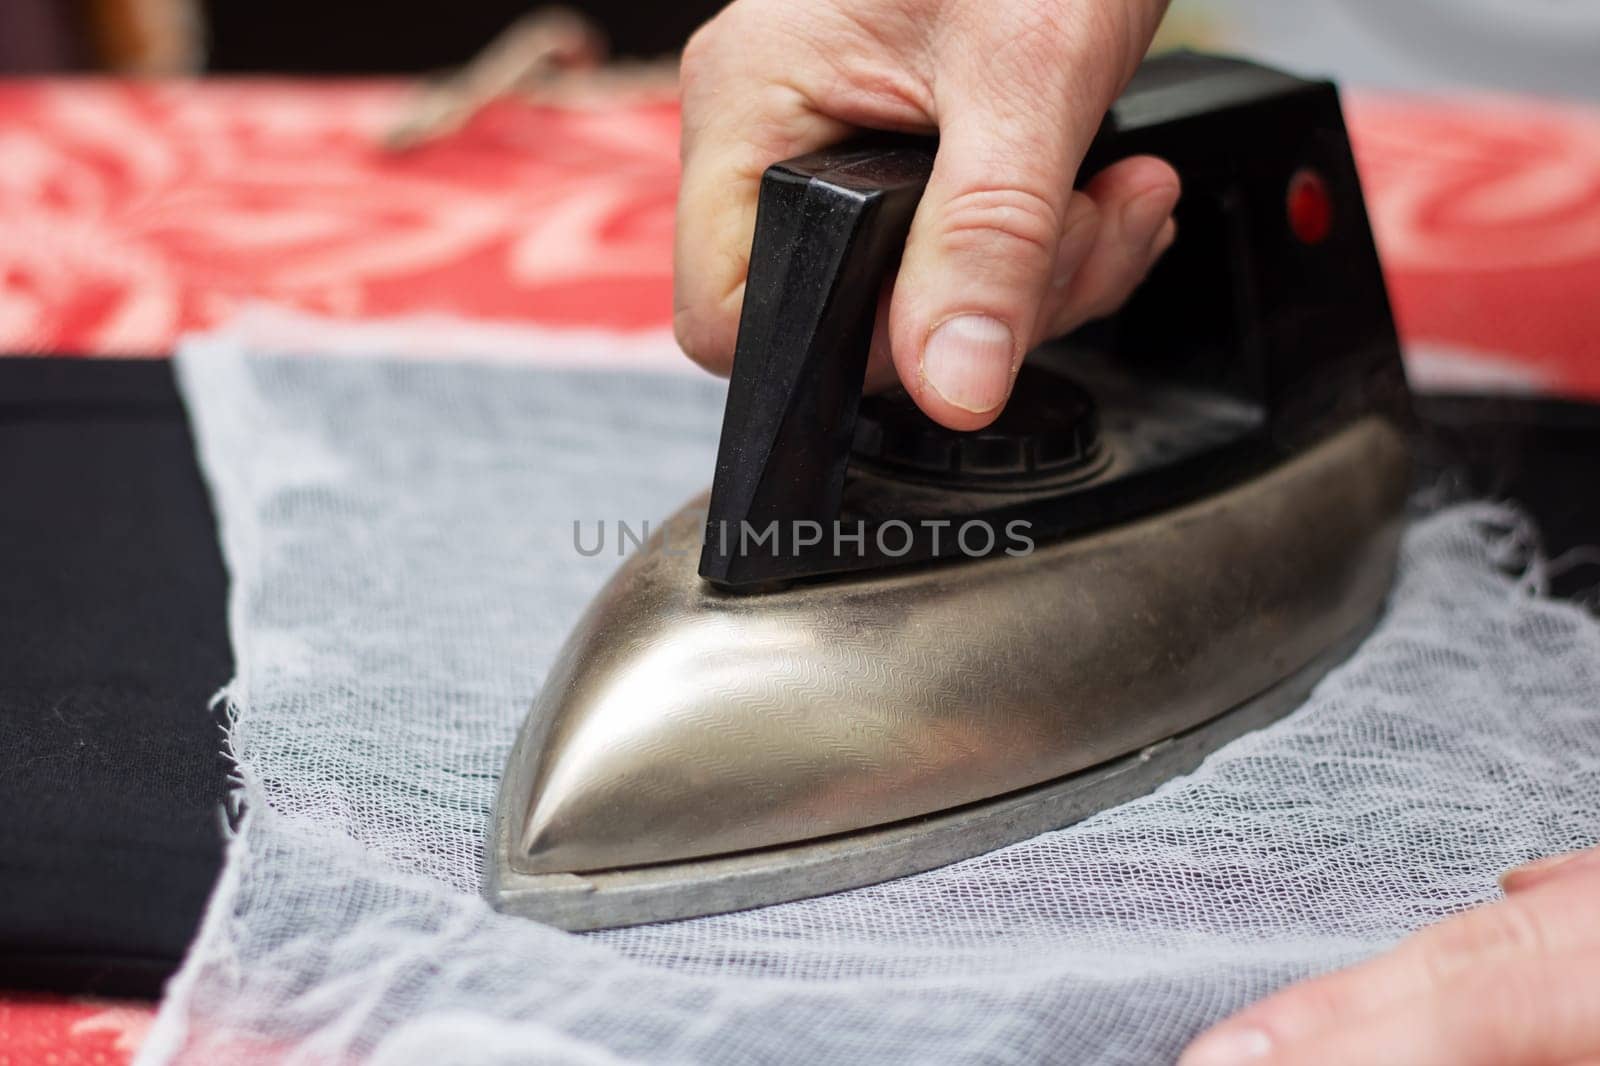 Using their thumb and fingers, a person irons a piece of fabric on a wooden table. The ironing board is covered with carmine leather, a fashionable choice in composite materials